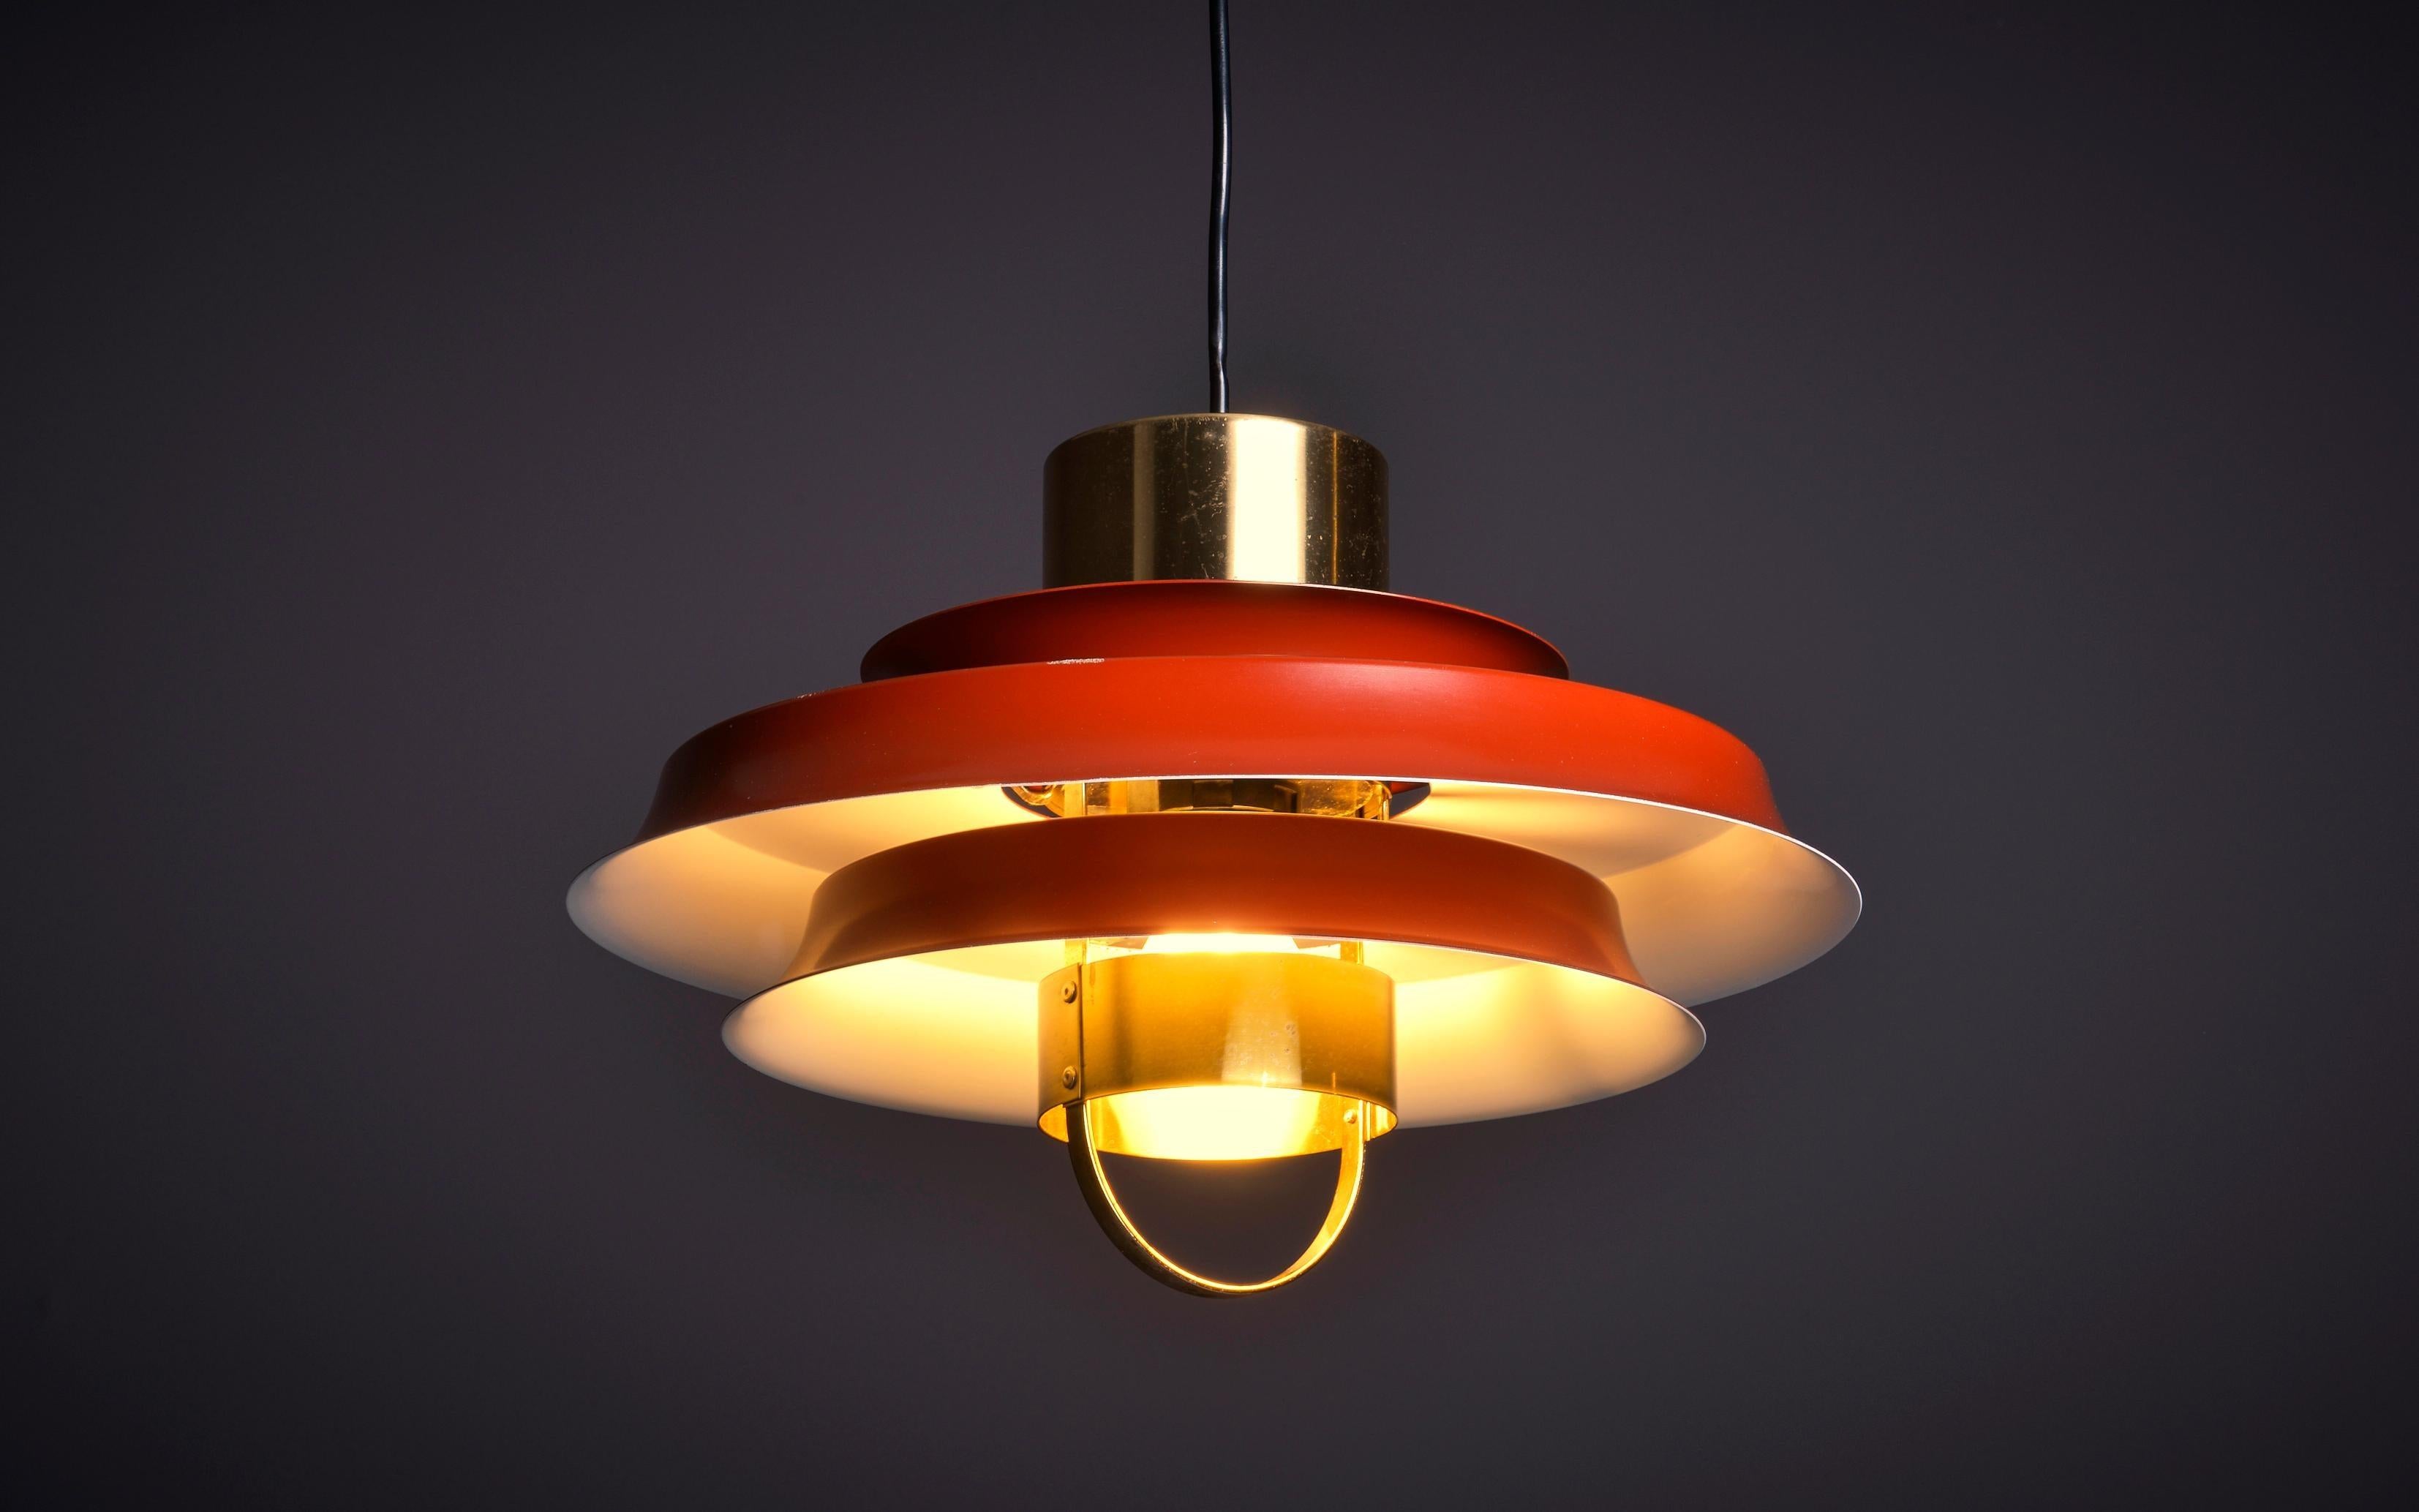 Pendant lamp in red lacquered aluminum and brass elements by Danish manufacturer Vitrika , 1970s. Socket: 1 x E27.

Danish lighting manufacturer Vitrika was founded in the 1940s with a focus on three main elements being retail, design and